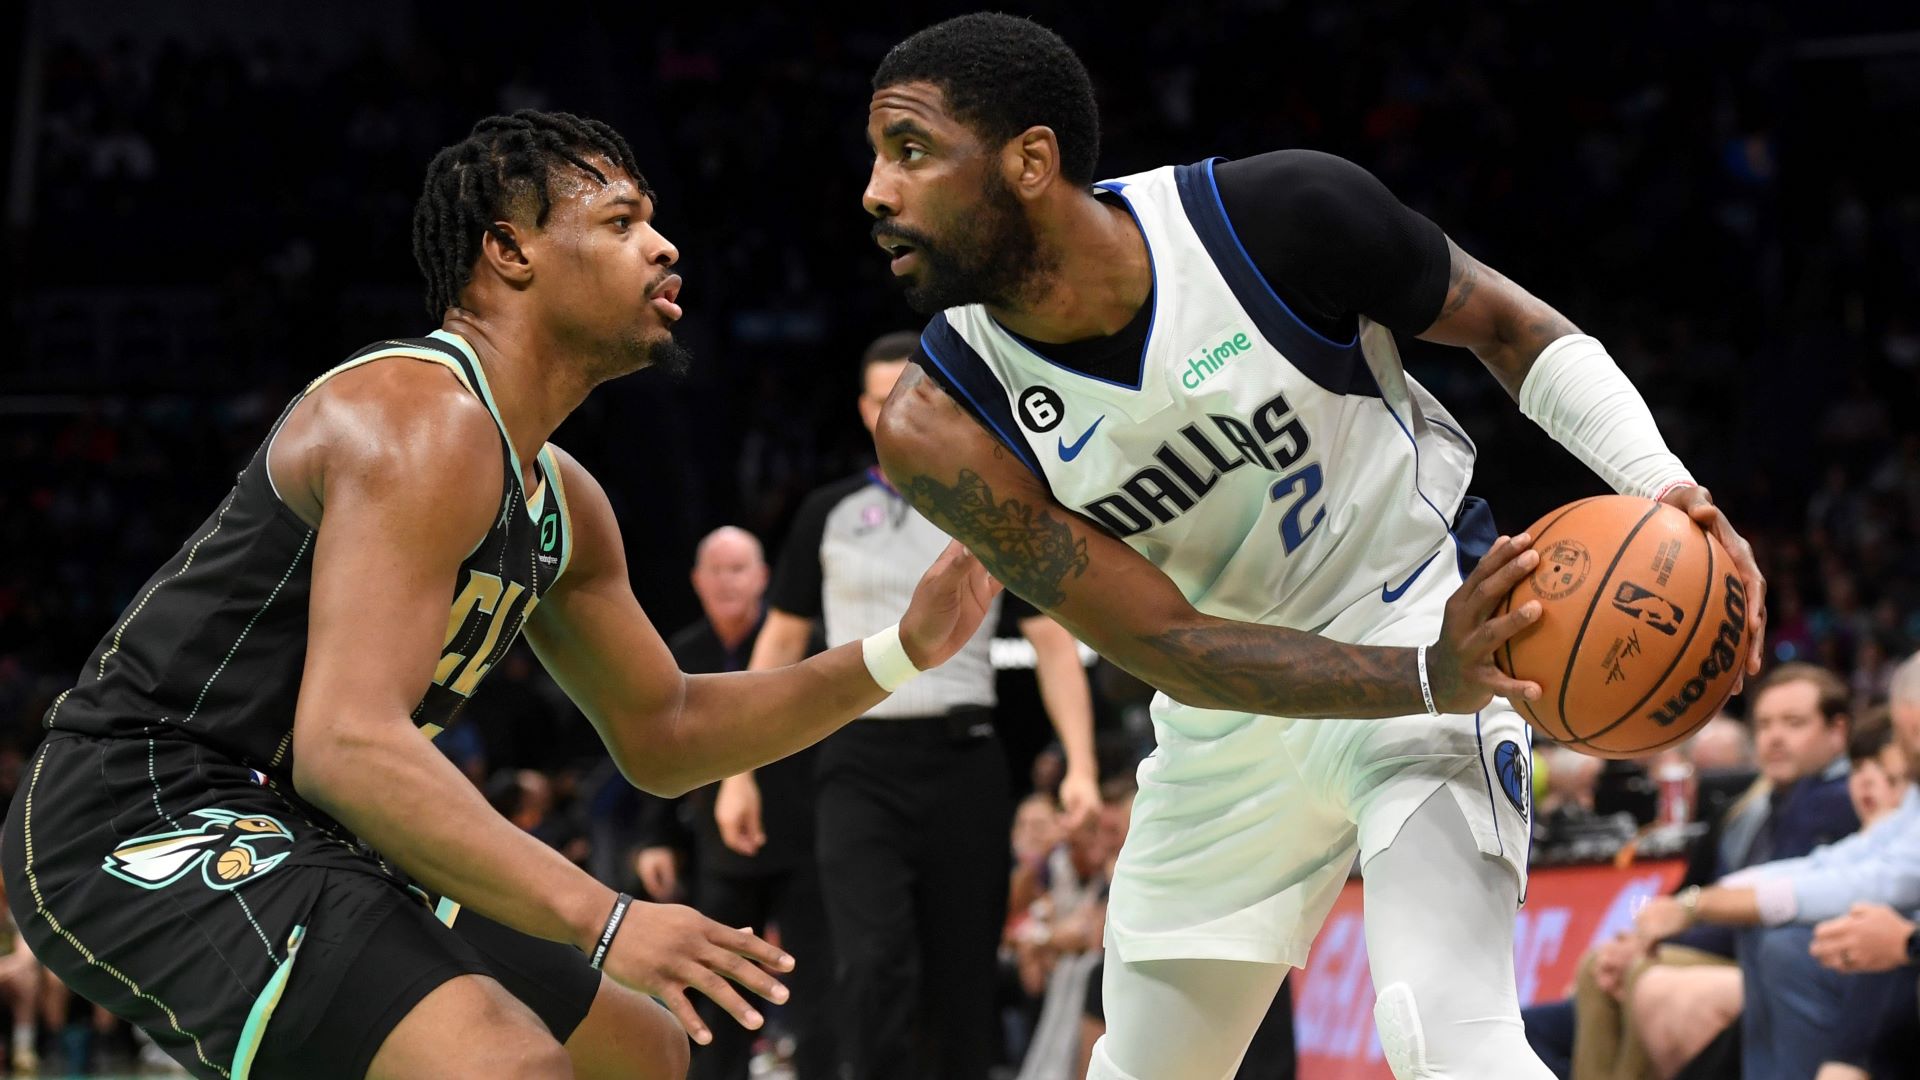 Kyrie Irving Explains Getting Fan Ejected From Mavericks-Hornets Game